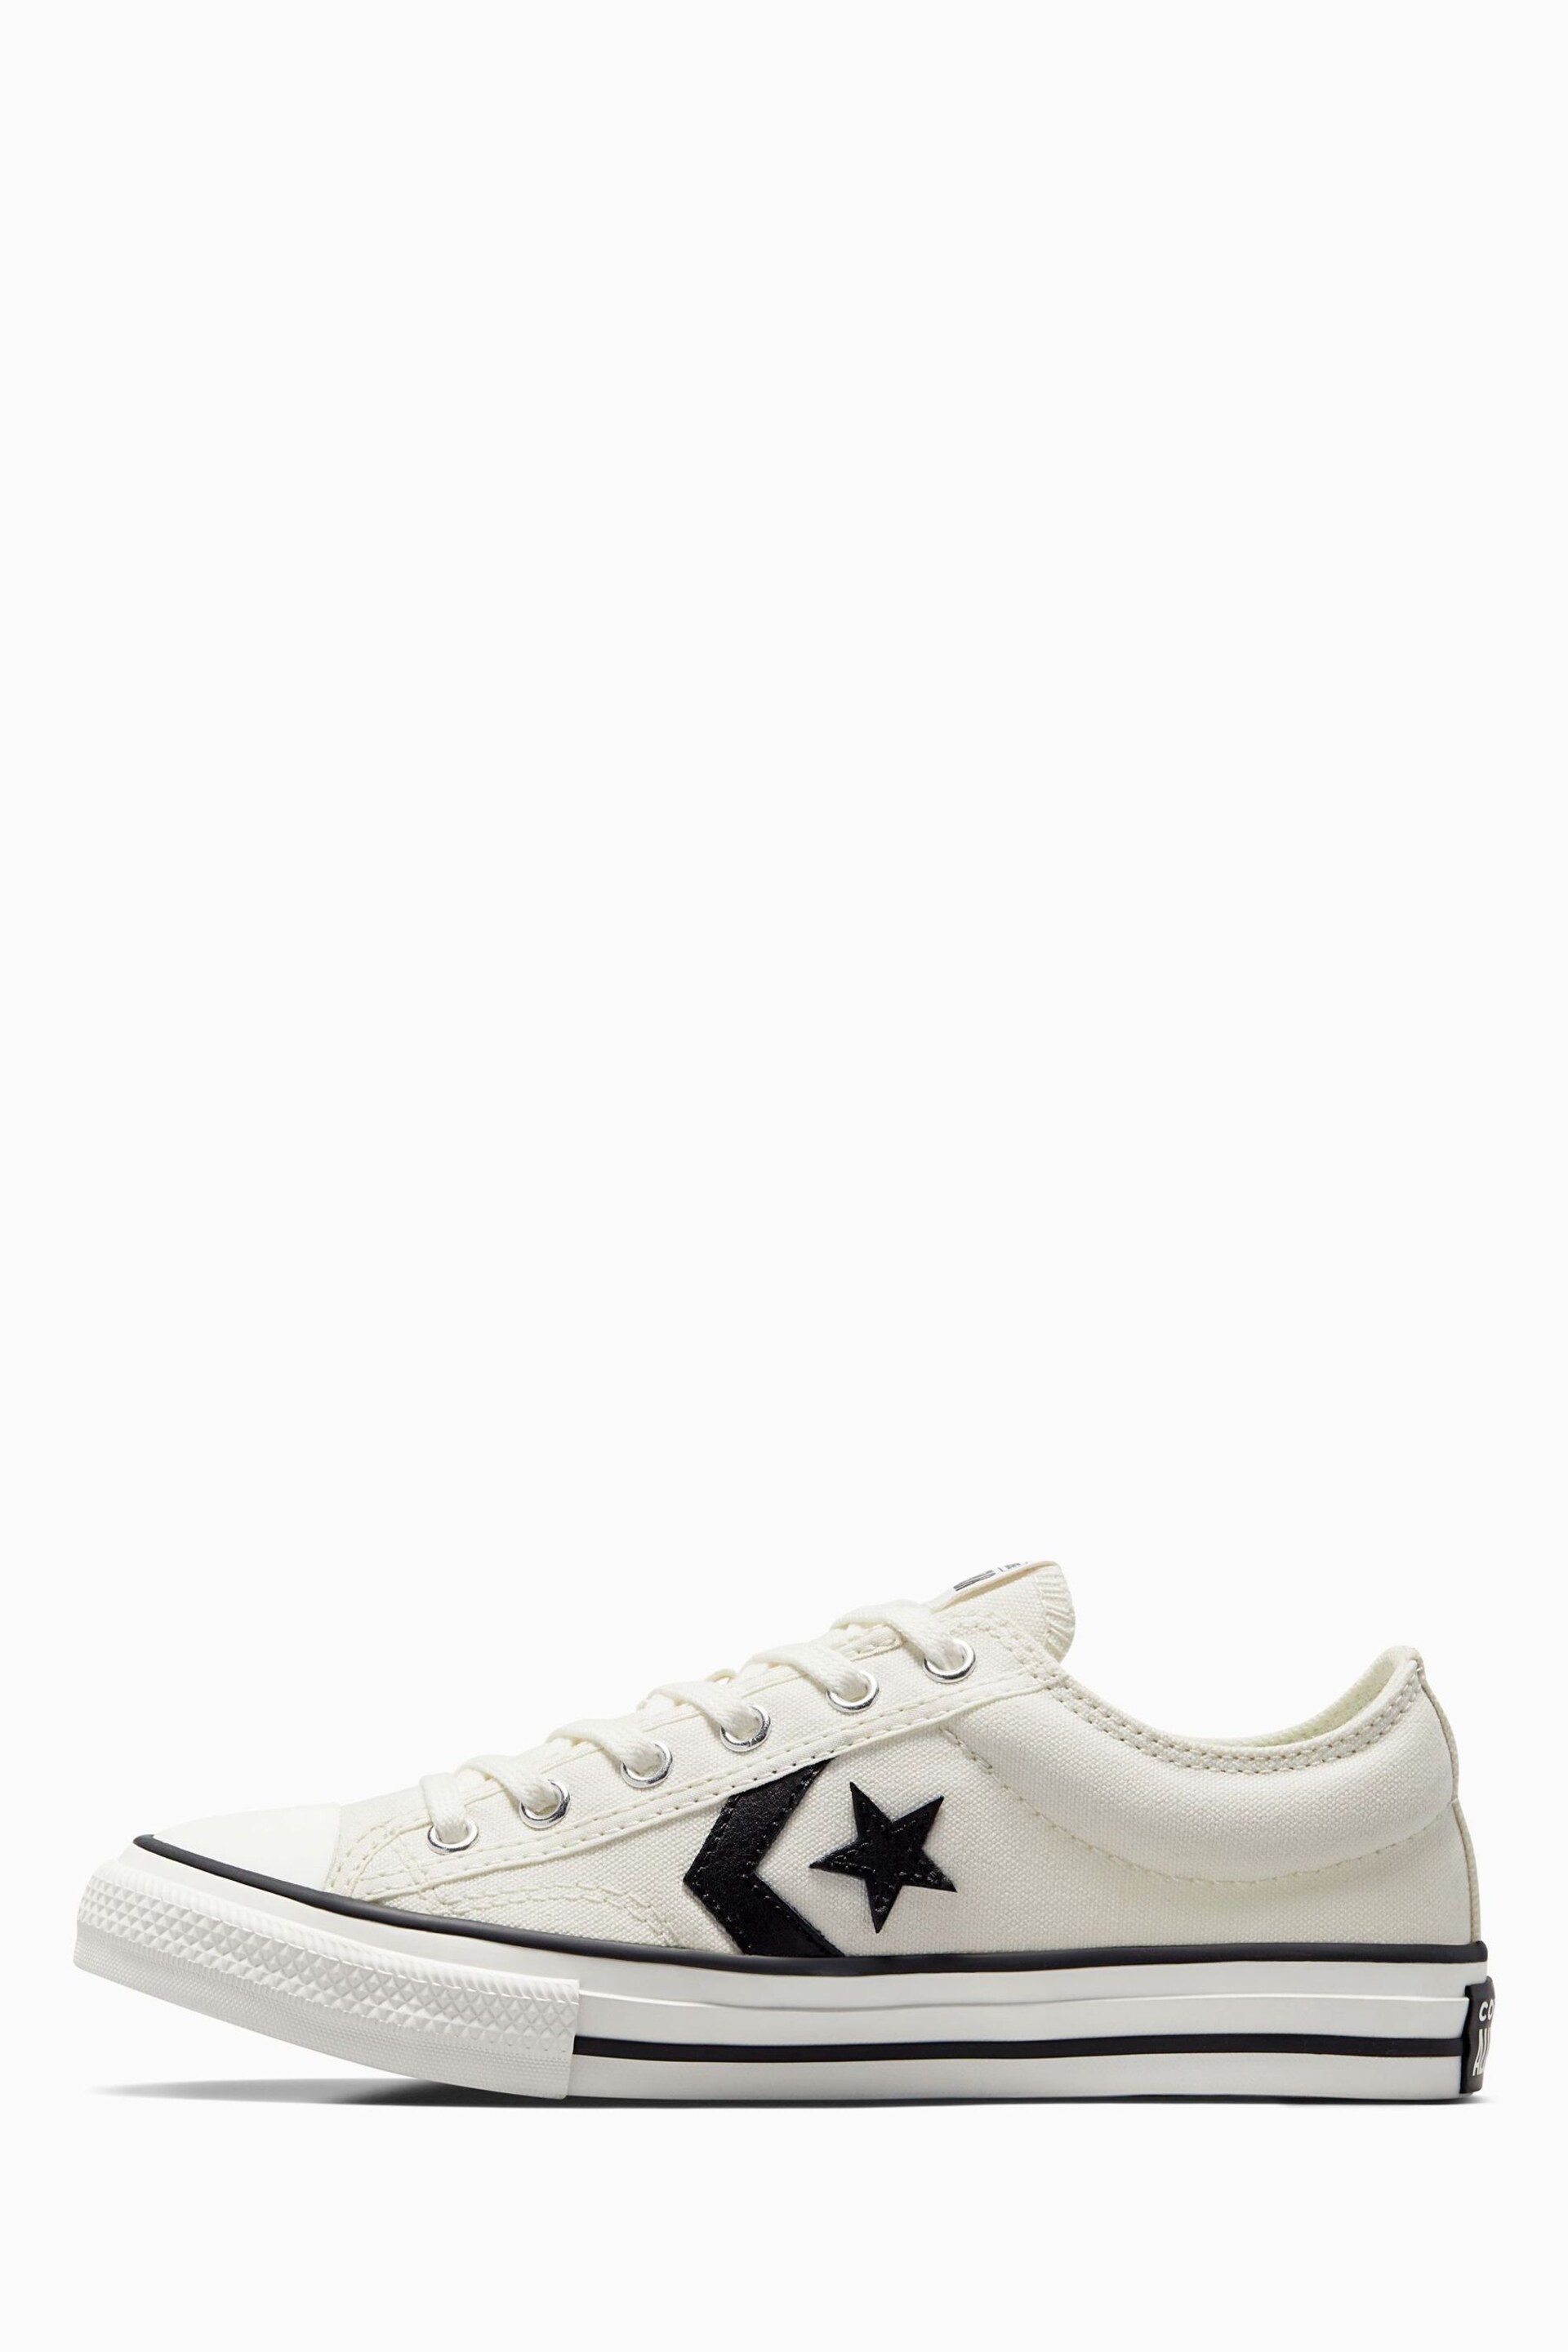 Converse White Youth Star Player 76 Trainers - Image 2 of 7